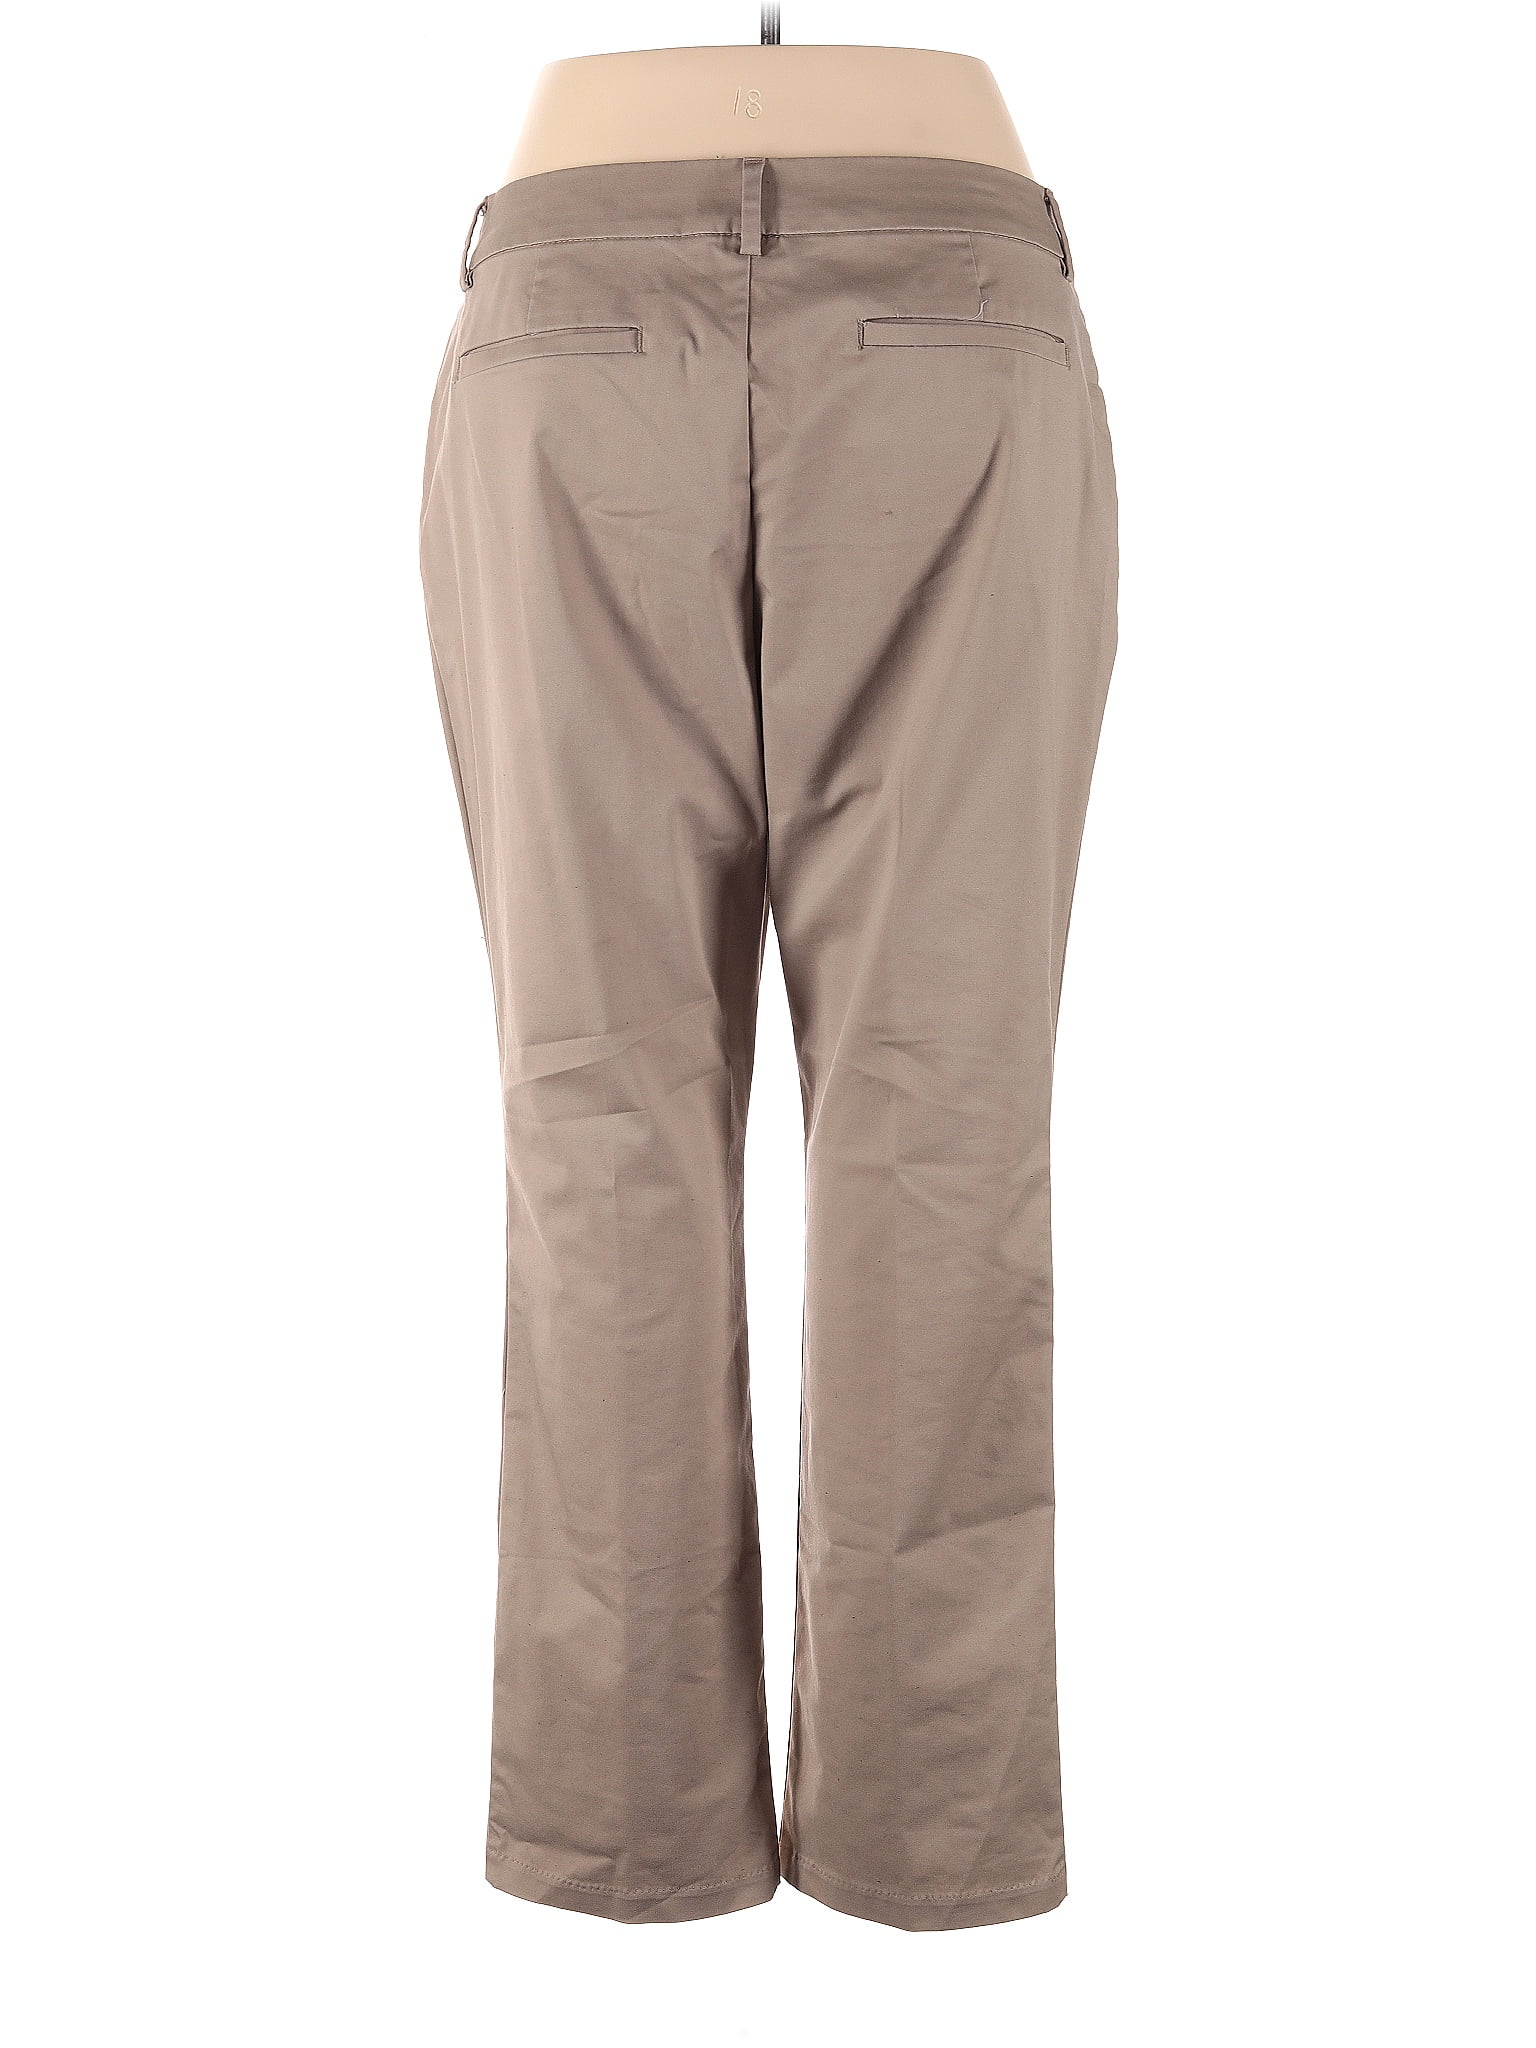 Lee Brown Casual Pants Size 6 - 69% off